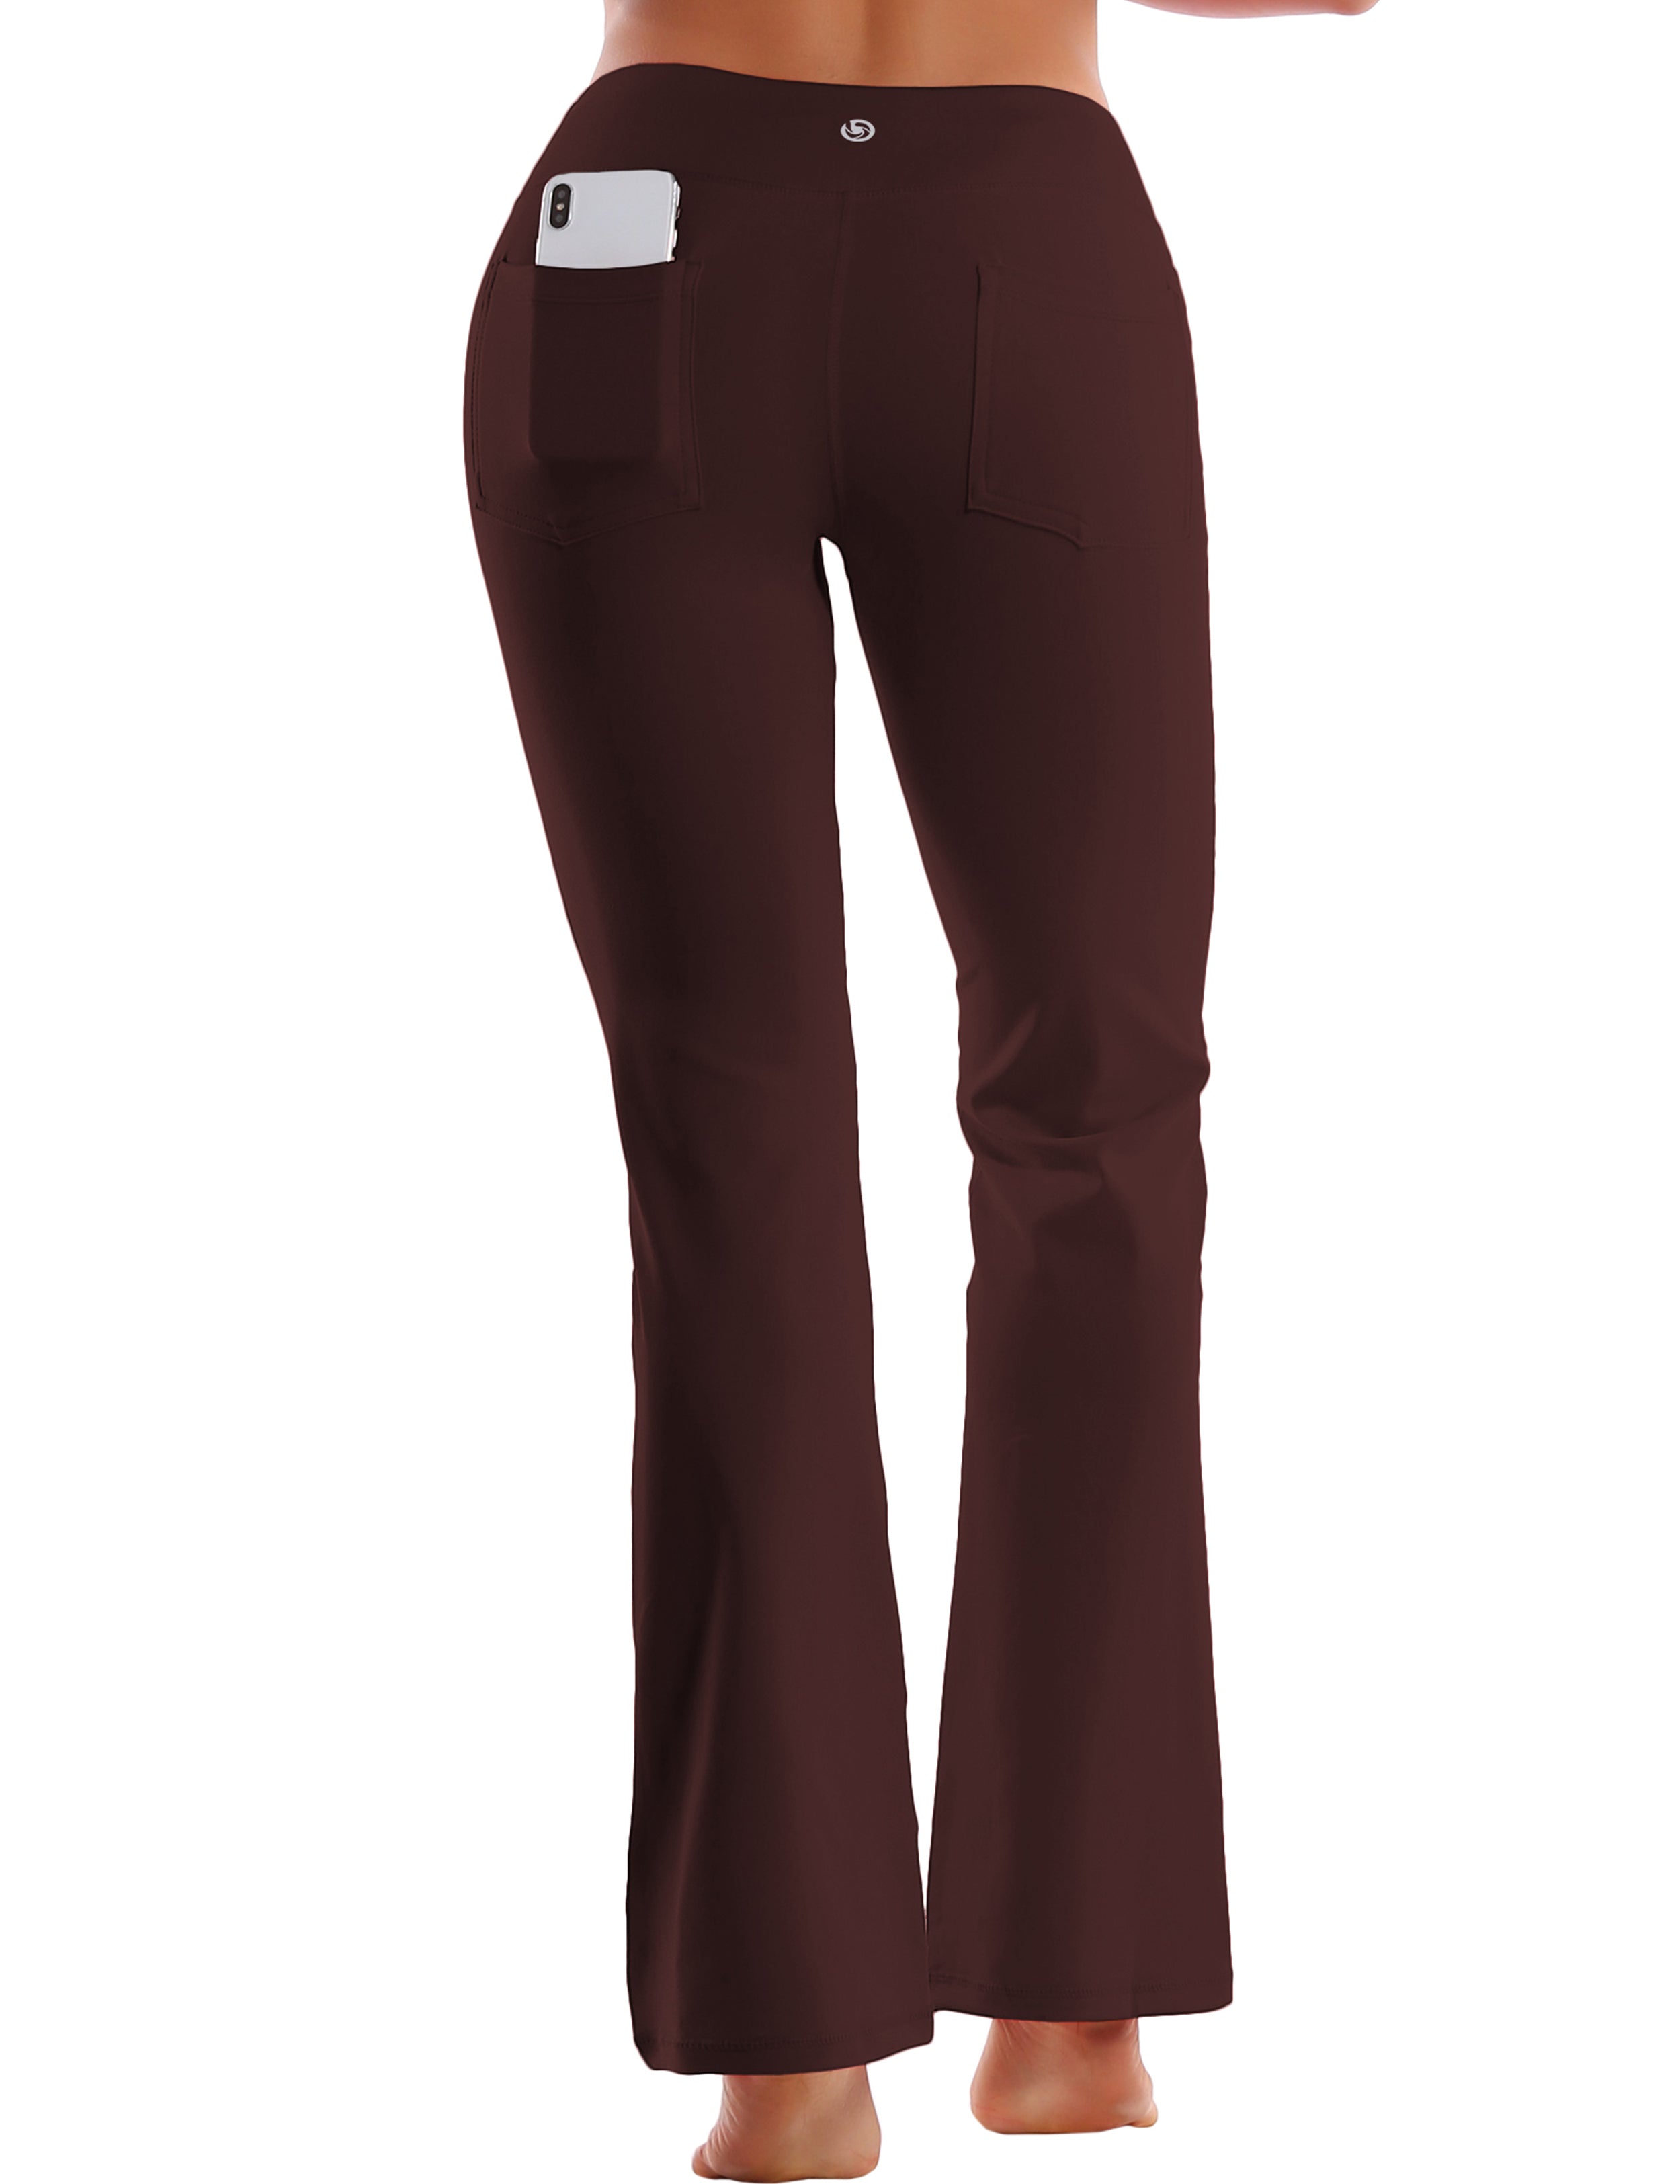 Back Pockets Bootcut Leggings mahoganymaroon 87%Nylon/13%Spandex Fabric doesn't attract lint easily 4-way stretch No see-through Moisture-wicking Inner pocket Four lengths